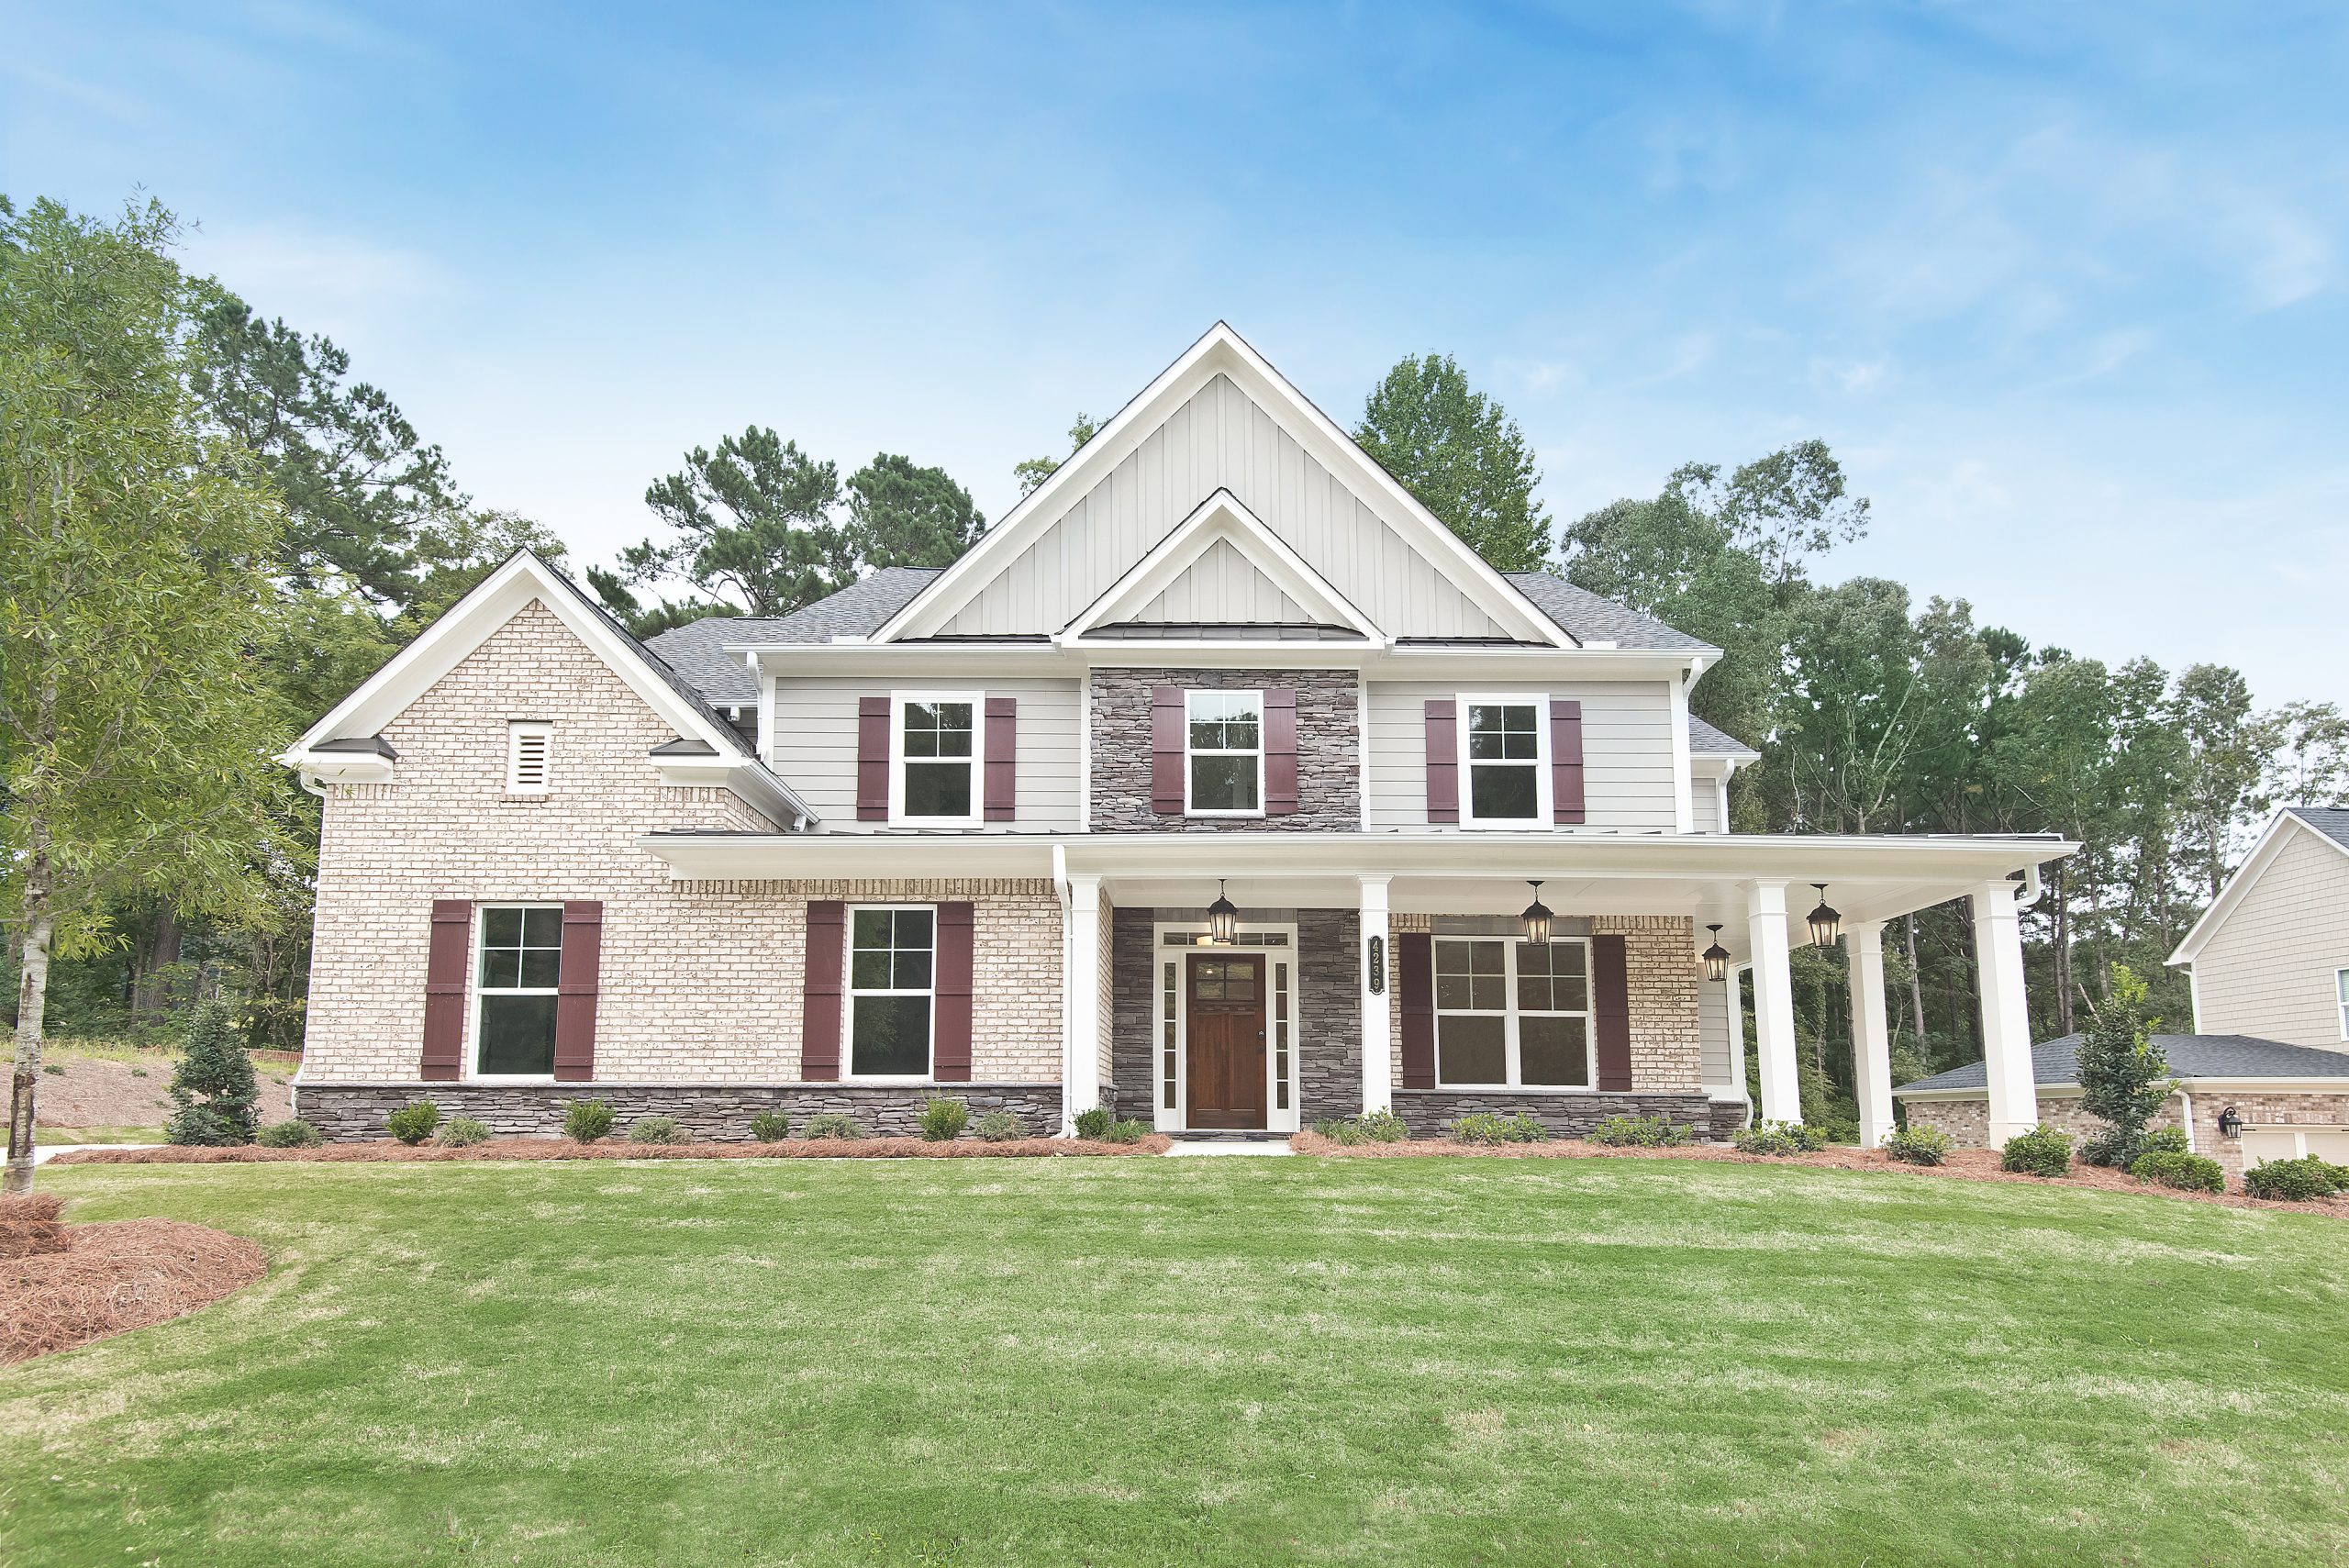 Discover the Latest on Brand New Homes in Georgia - Kerley Family Homes